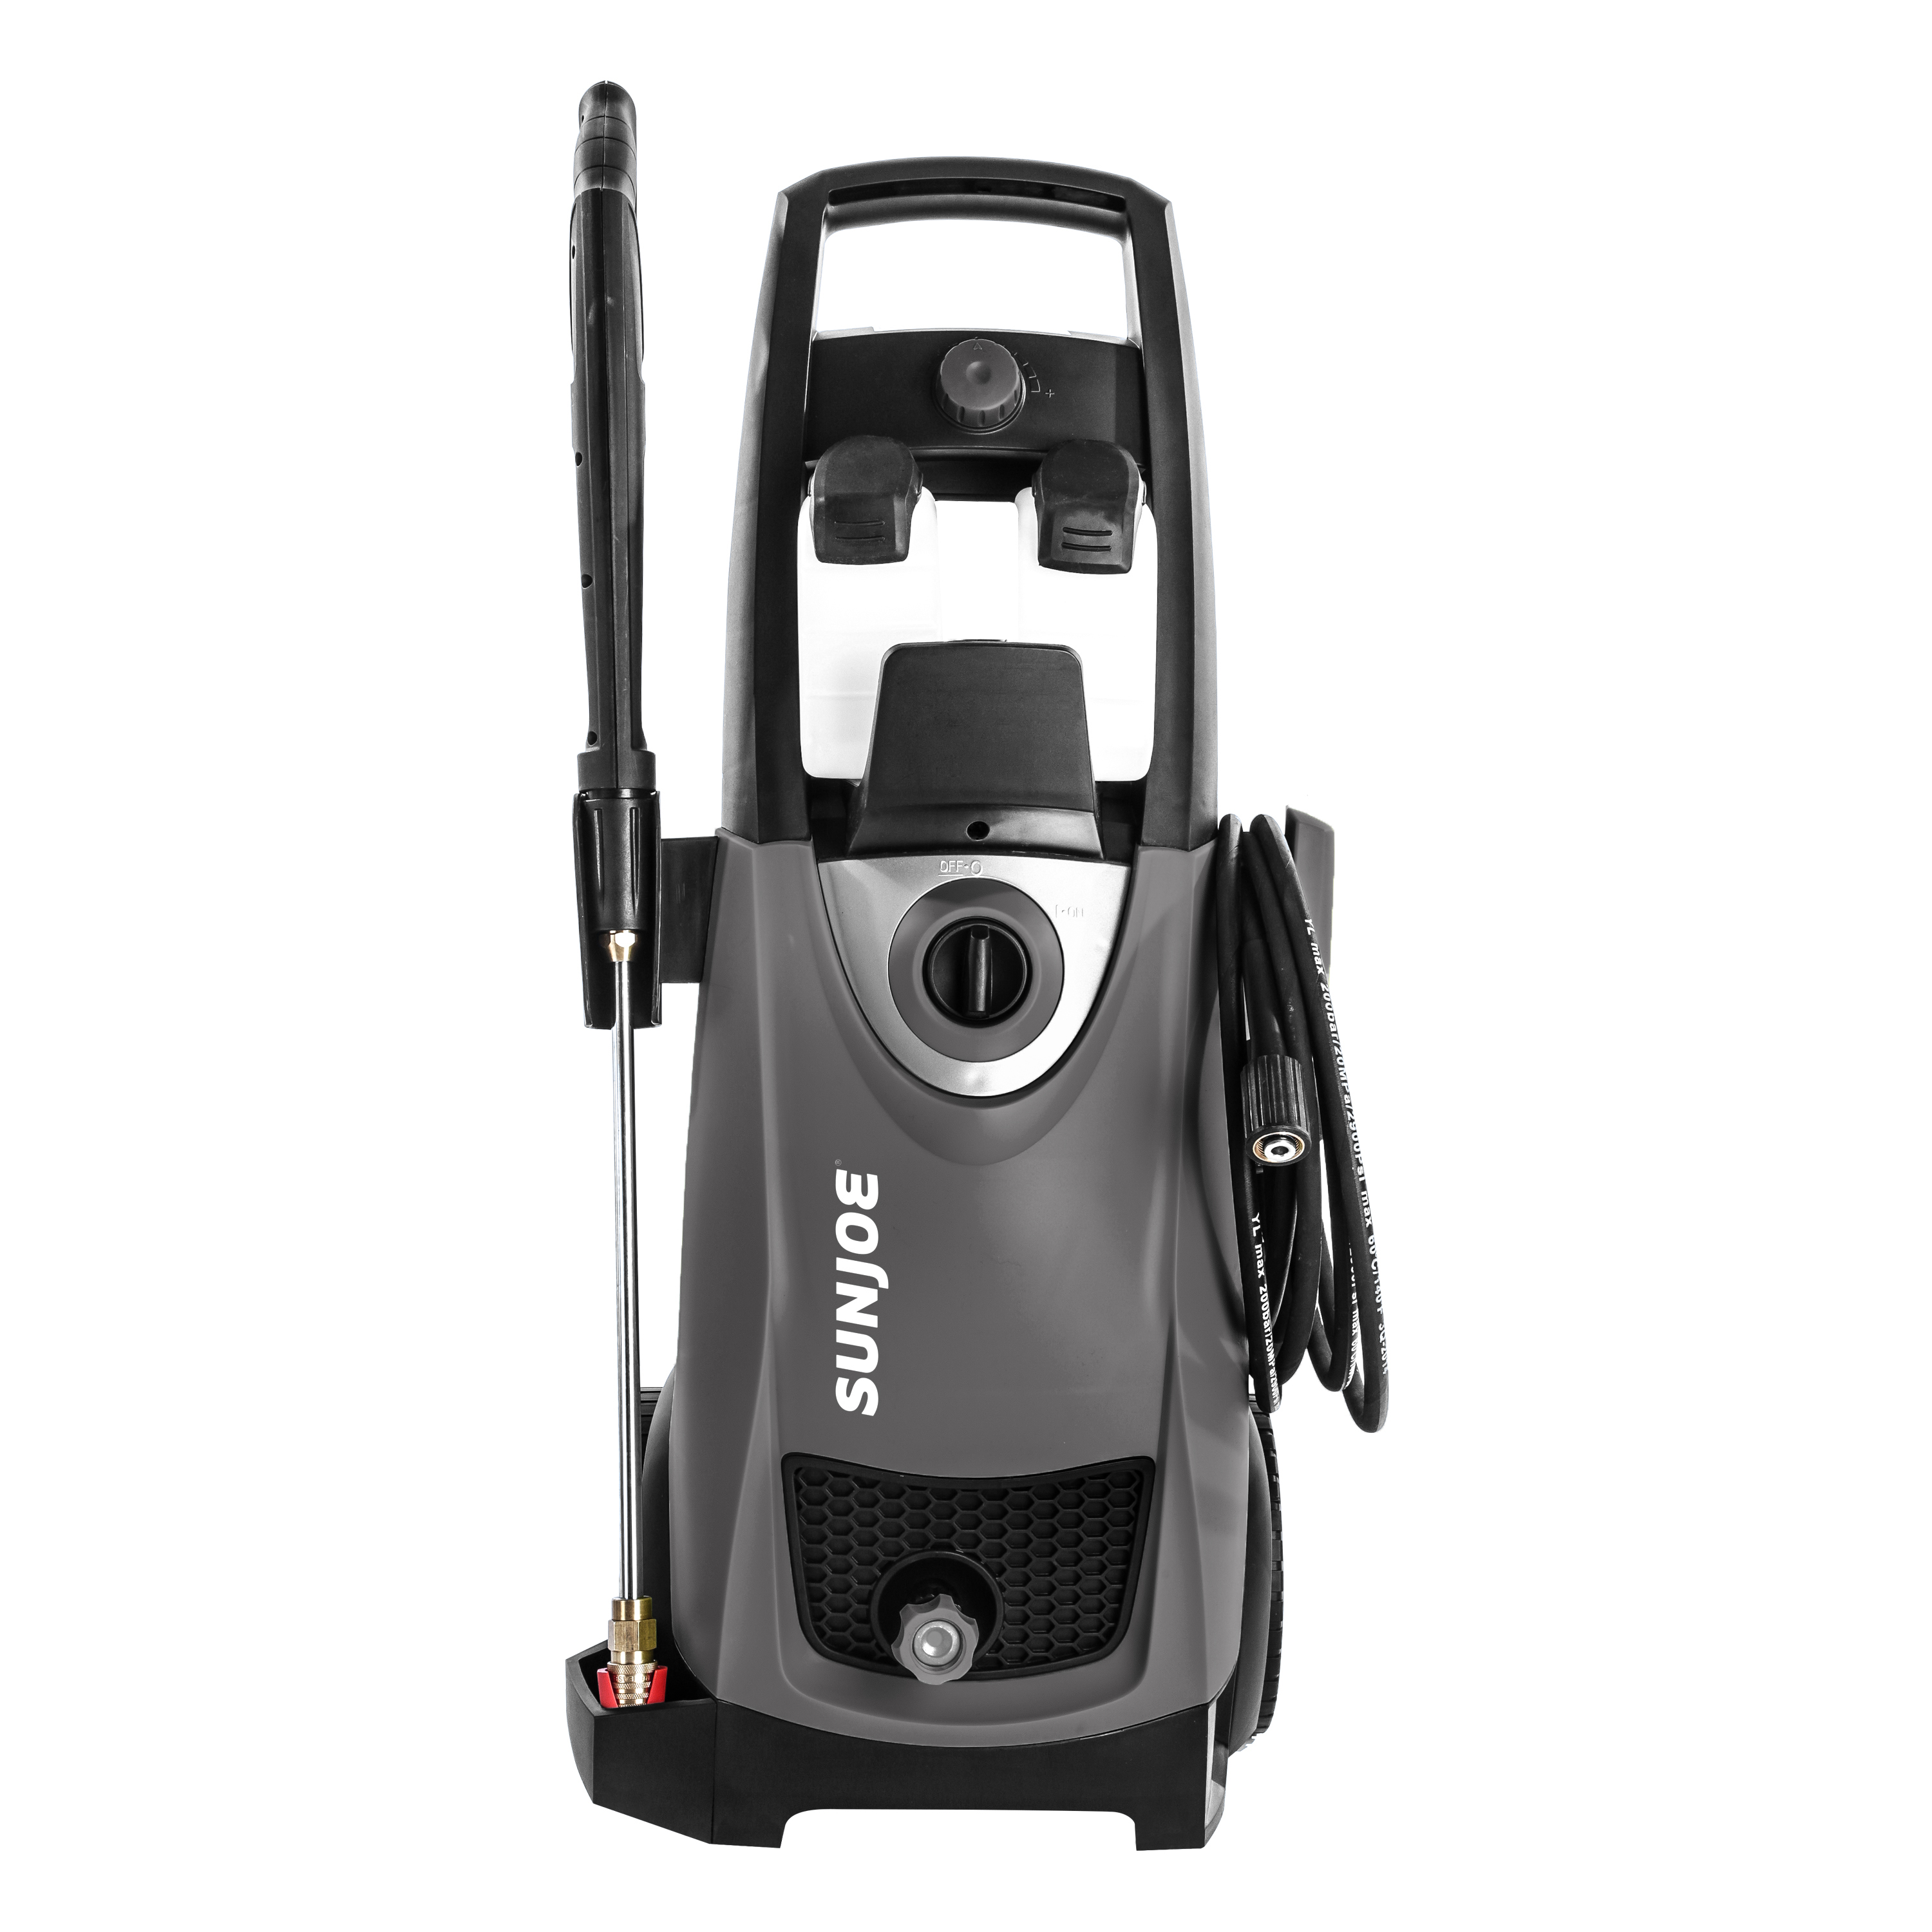 Sun Joe SPX3000 Electric Pressure Washer, 14.5-Amp, Quick-Connect Tips, Black - image 3 of 12